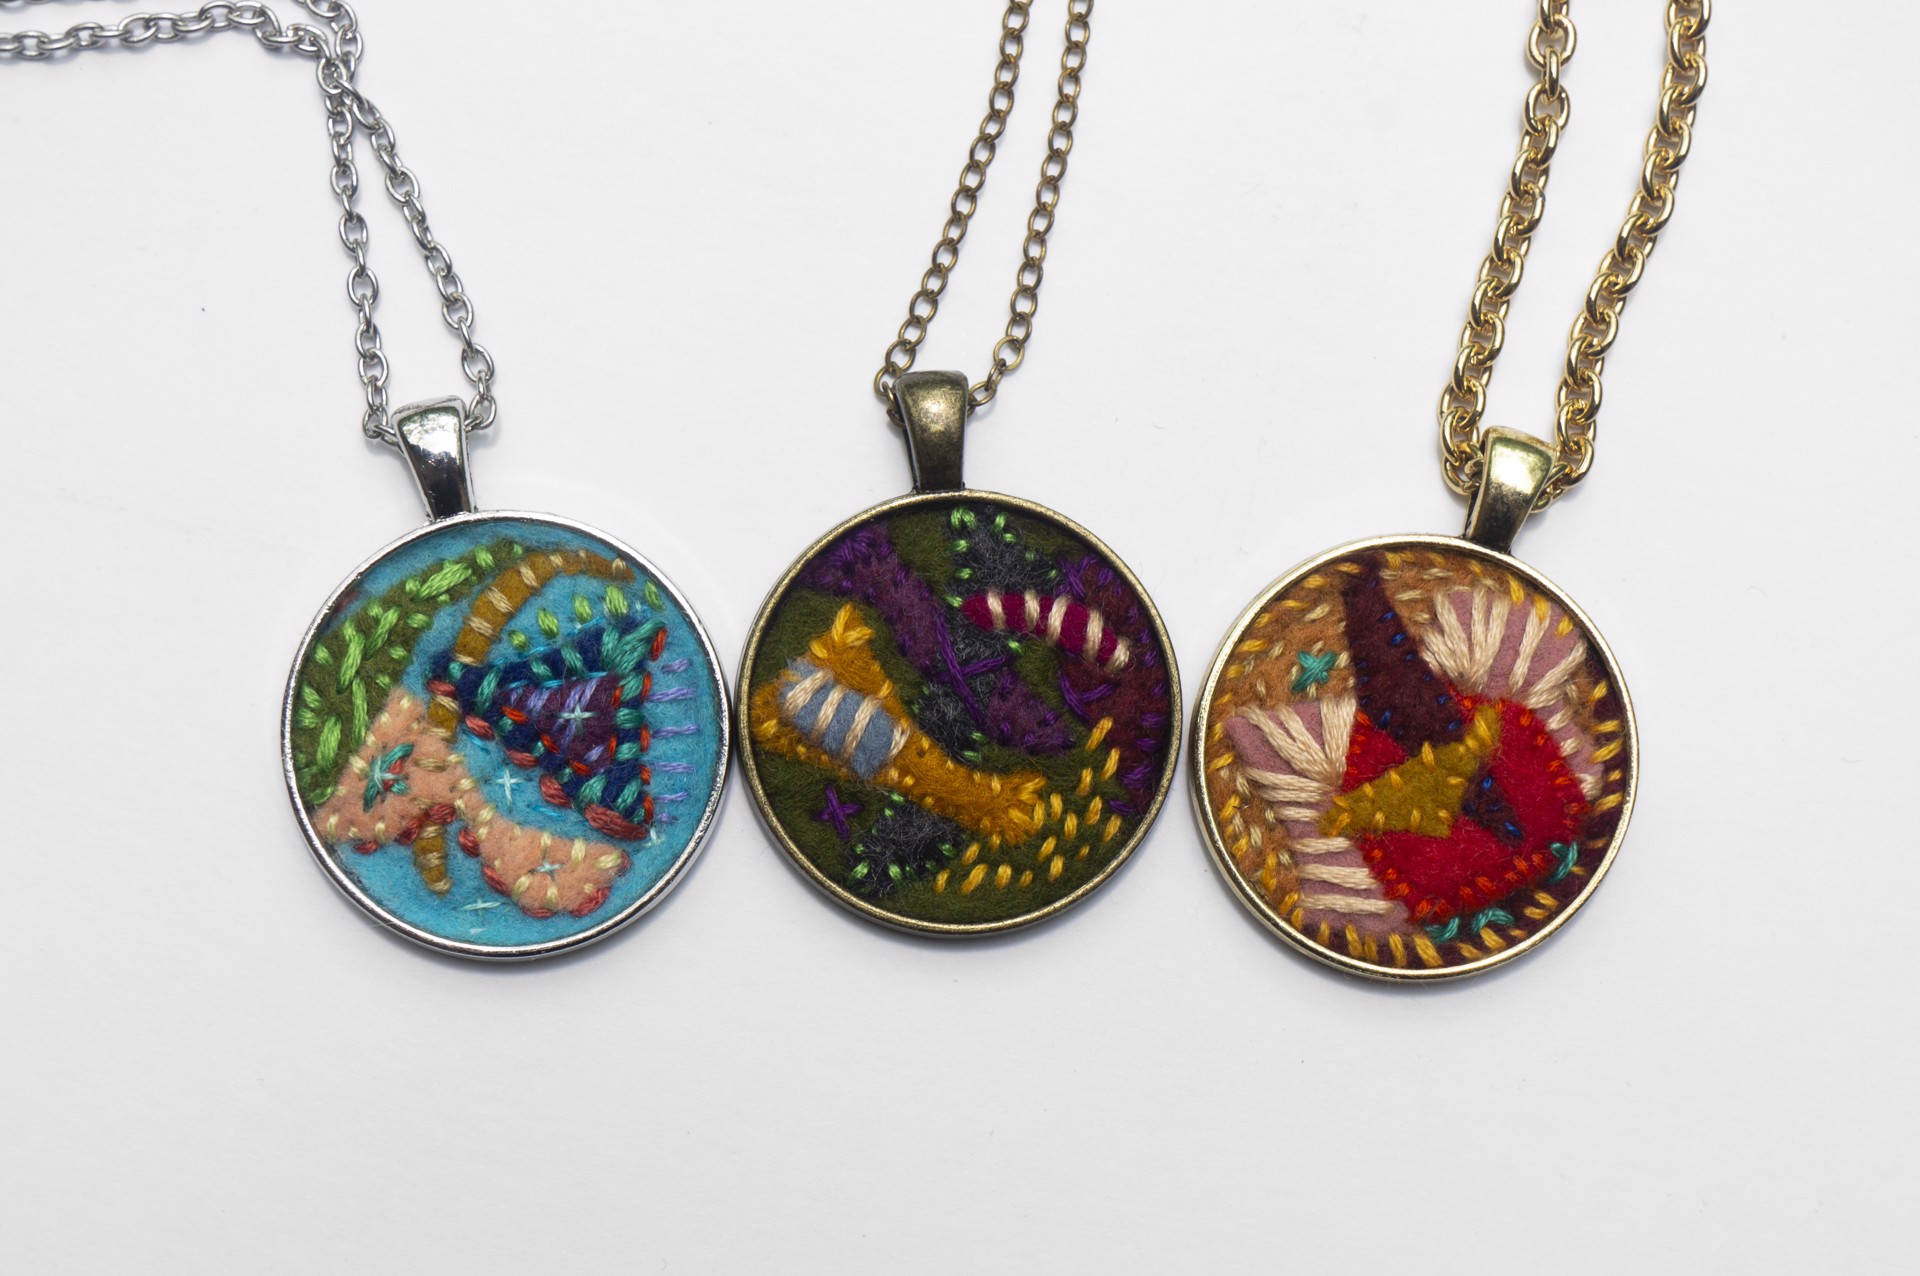 Embroidered Pendants by Hattie Lee